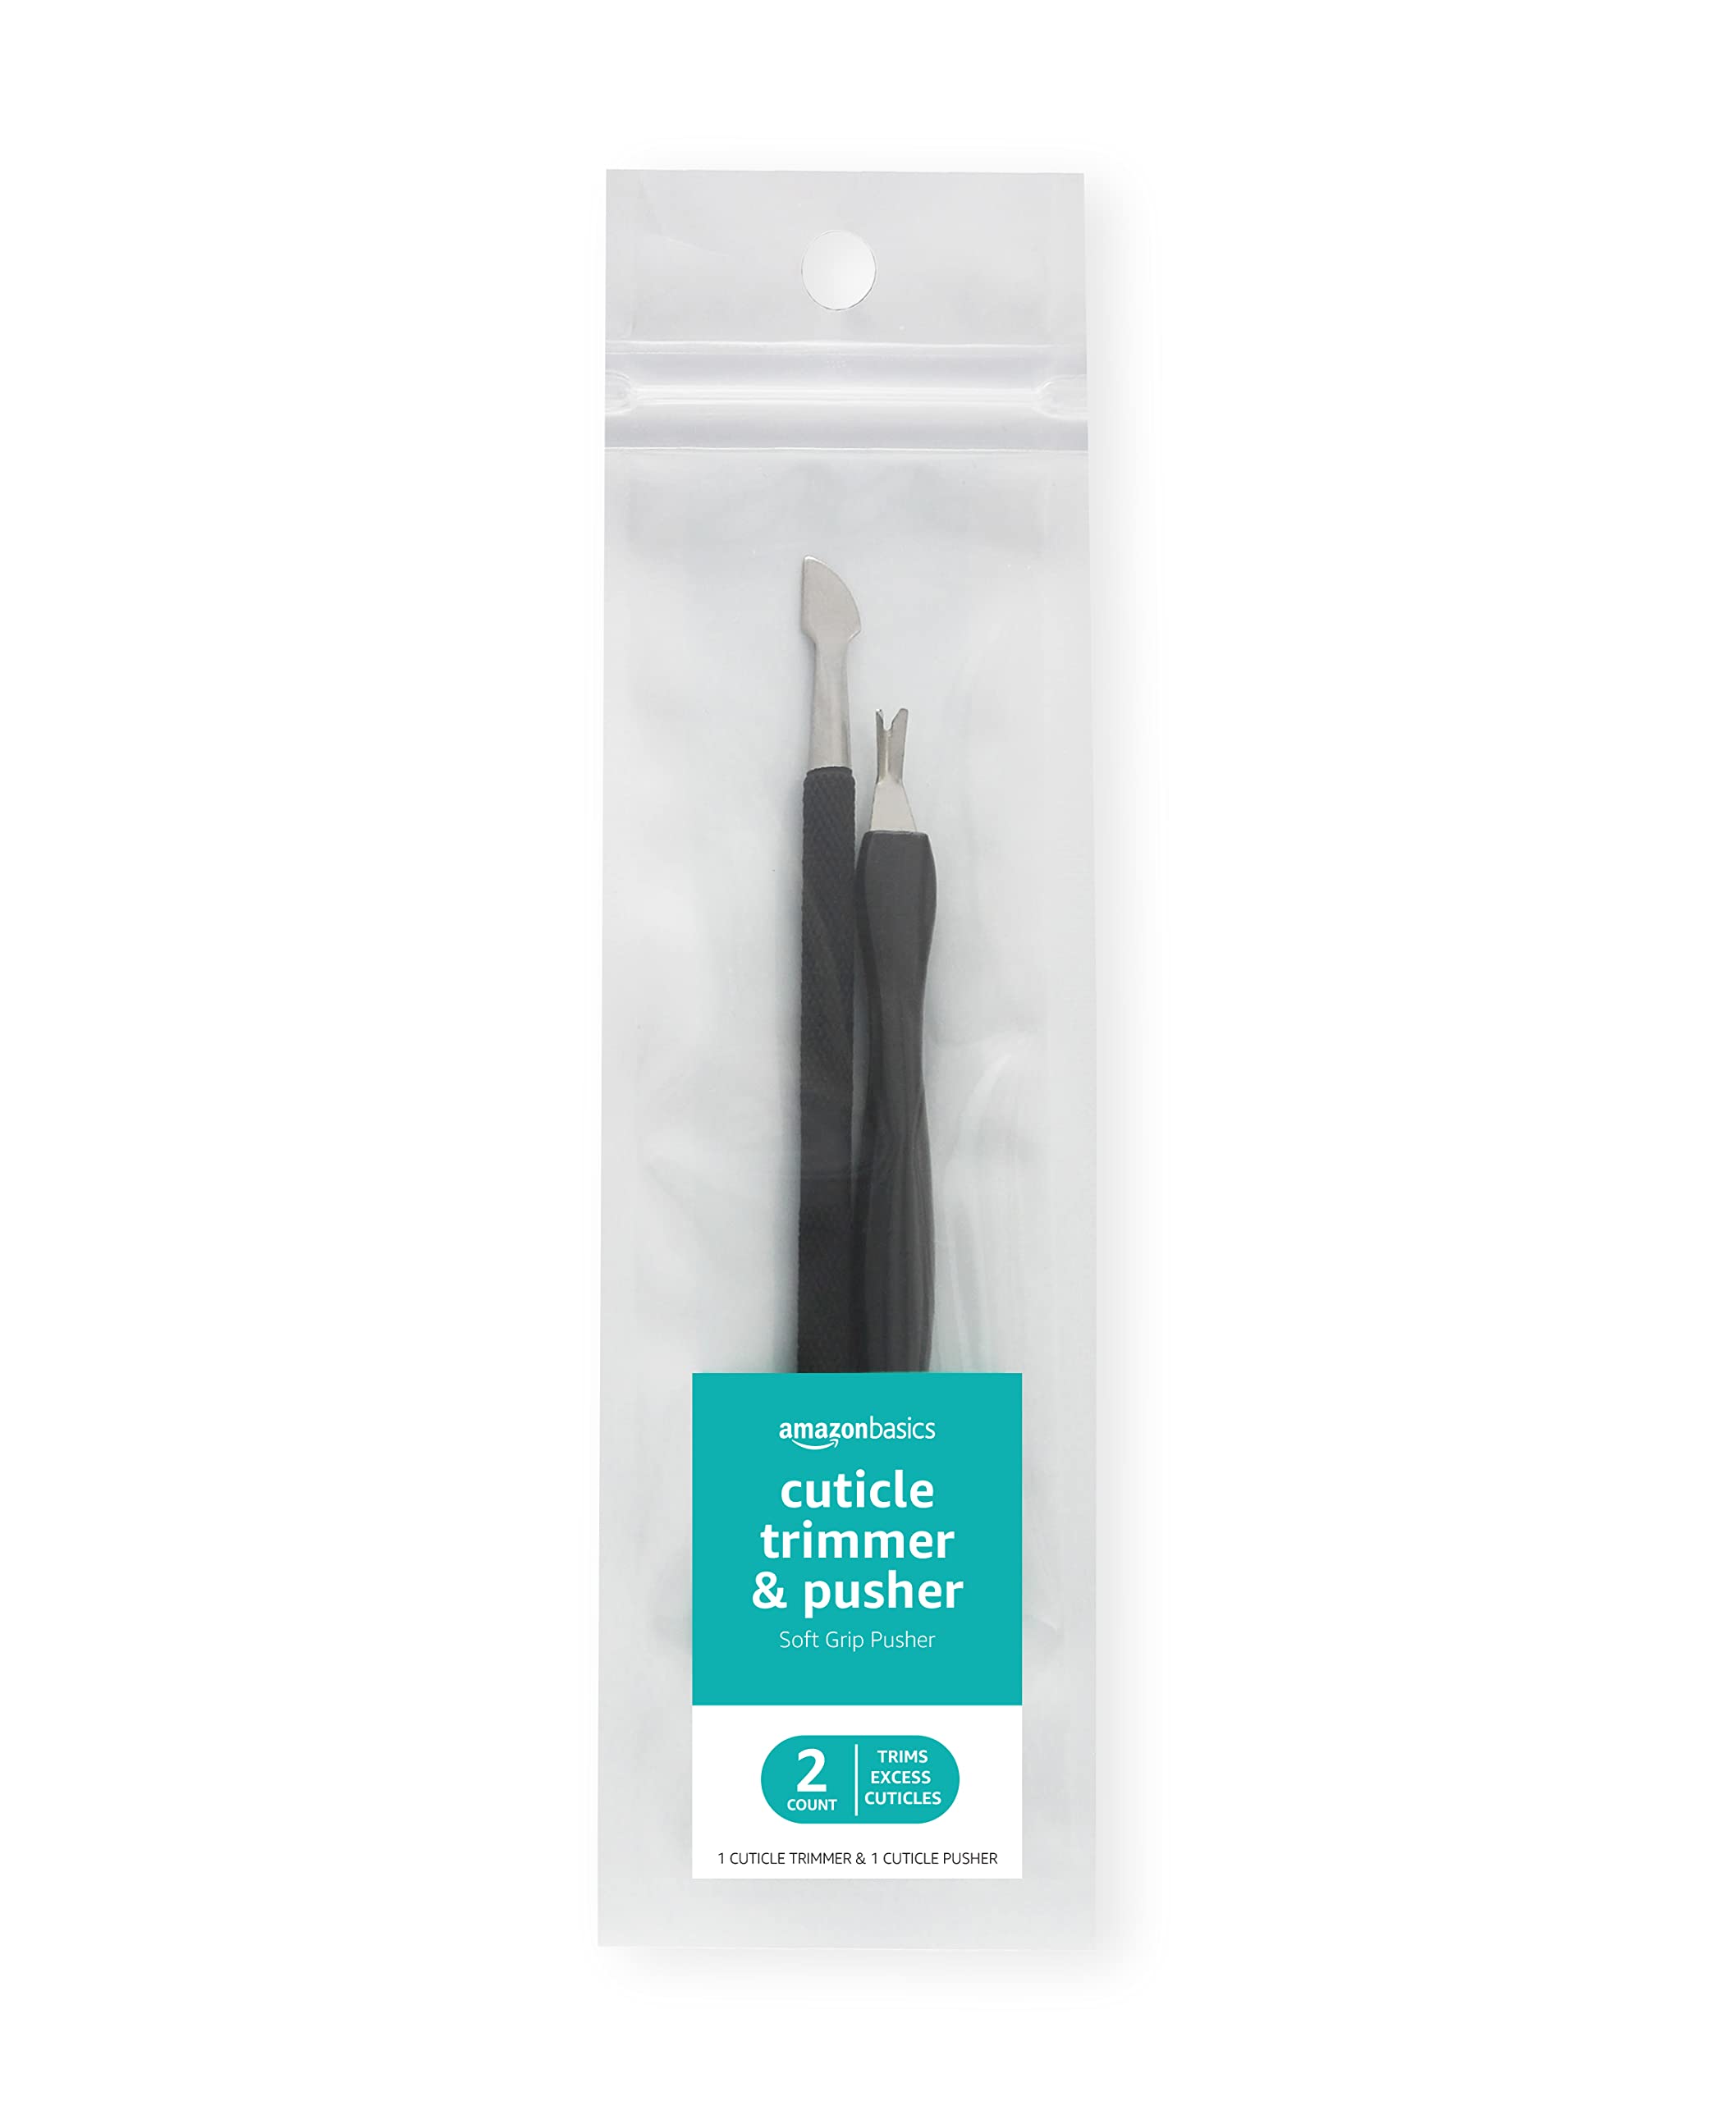 Amazon Basics Cuticle Trimmer and Pusher, 2 Count $2.60 shipped w/ Prime